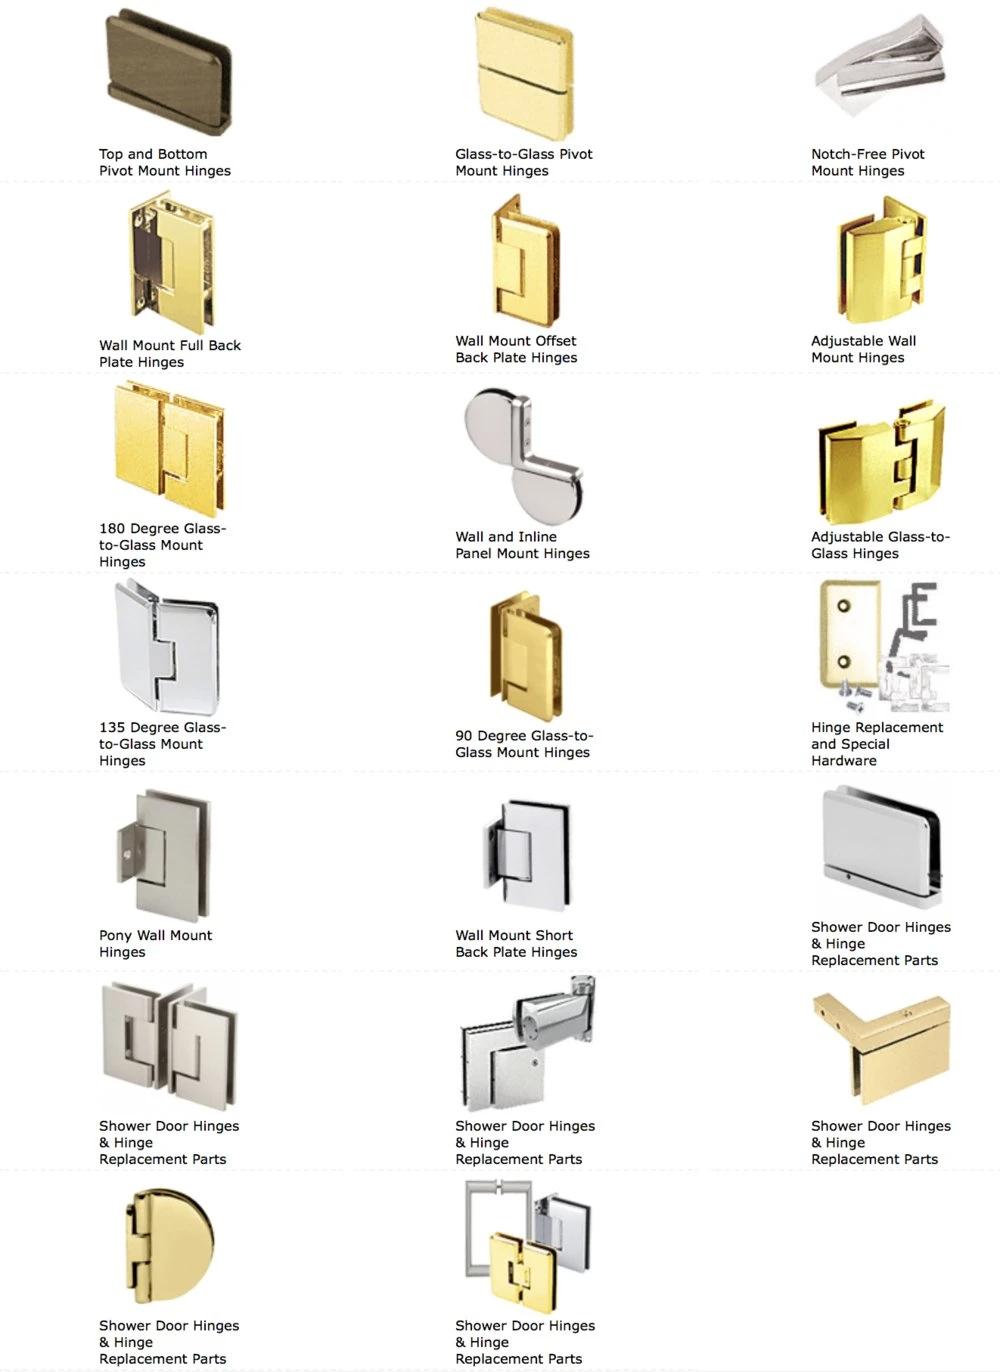 Half-Overlay Glass Doors Hinge Cupboard Showcase Wine Cabinet Clamp Ambry Gate Hinges Replacement Parts Brushed Nickel